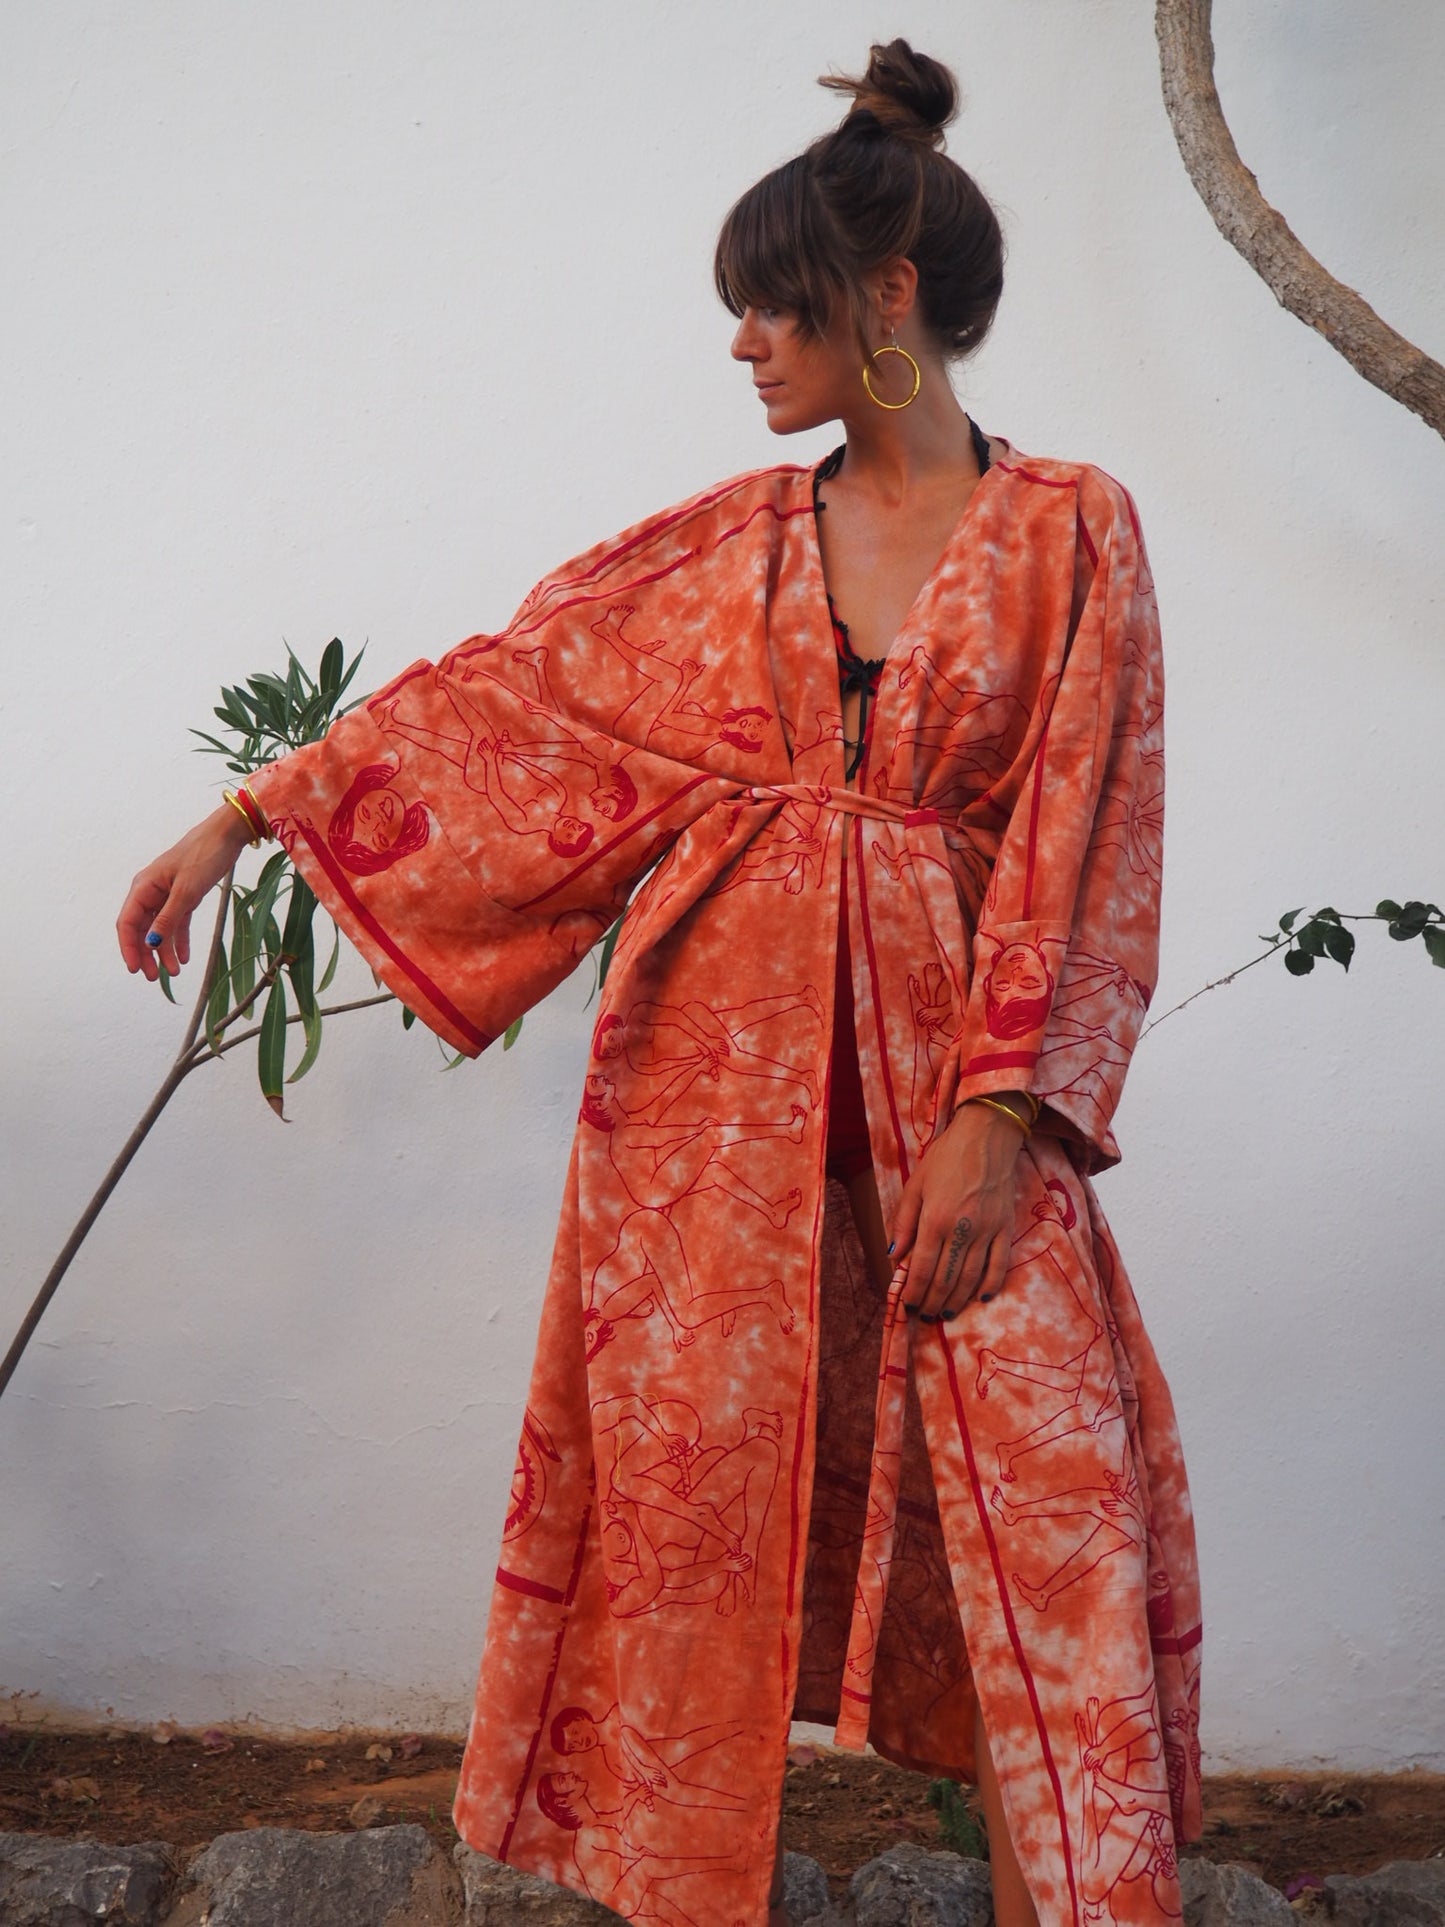 Up-cycled dressing gown with tantric sex position print by Vagabond Ibiza